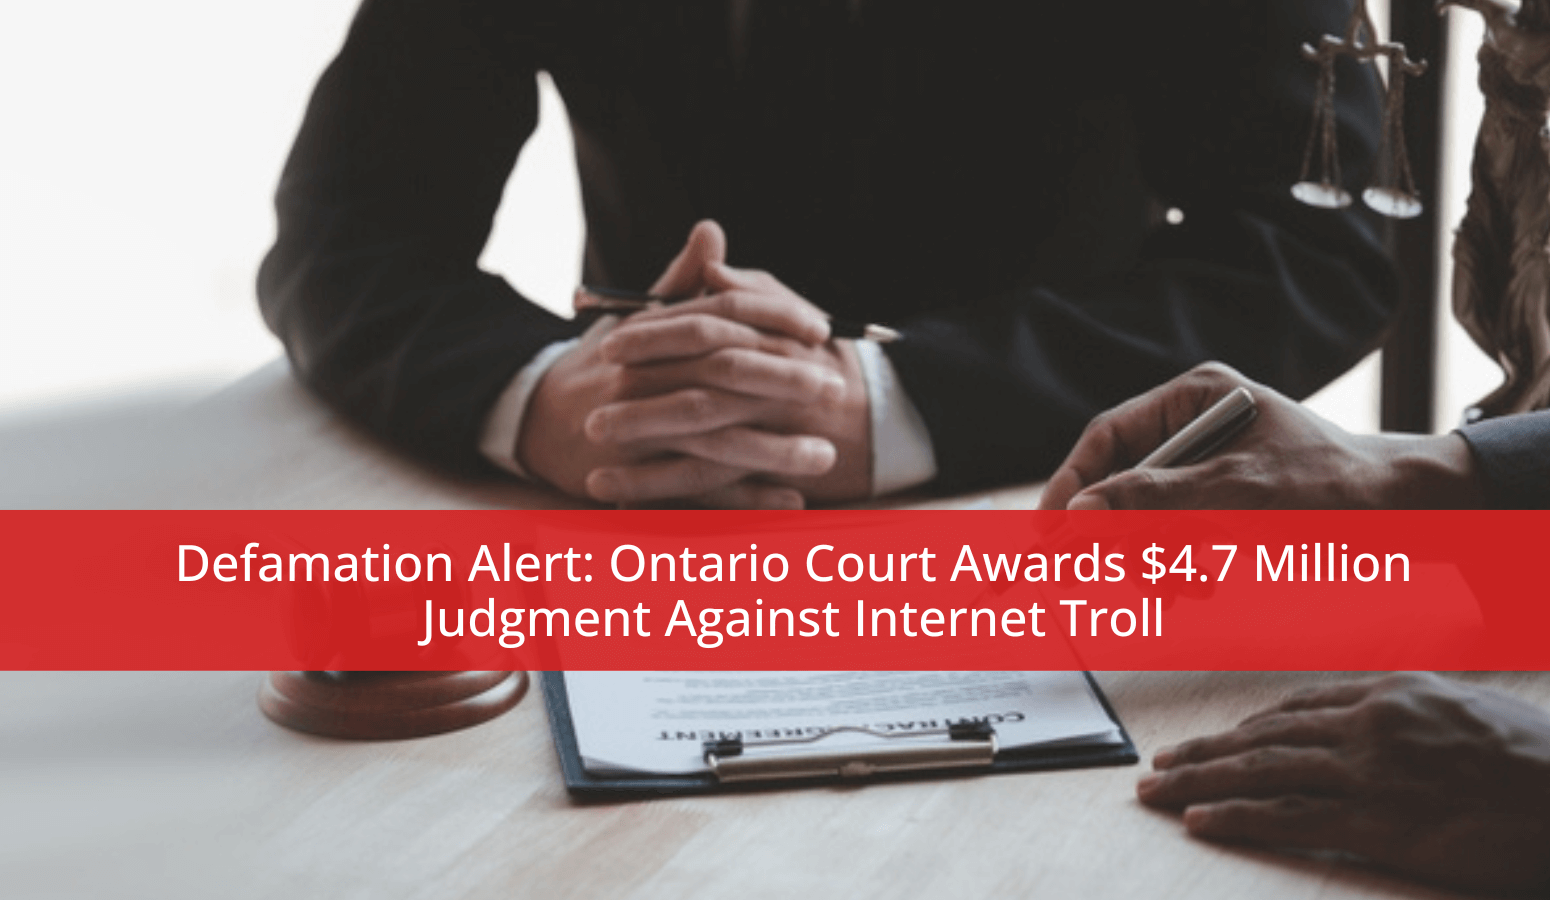 Featured image for “Defamation Alert: Ontario Court Awards $4.7 Million Judgment Against Internet Troll”